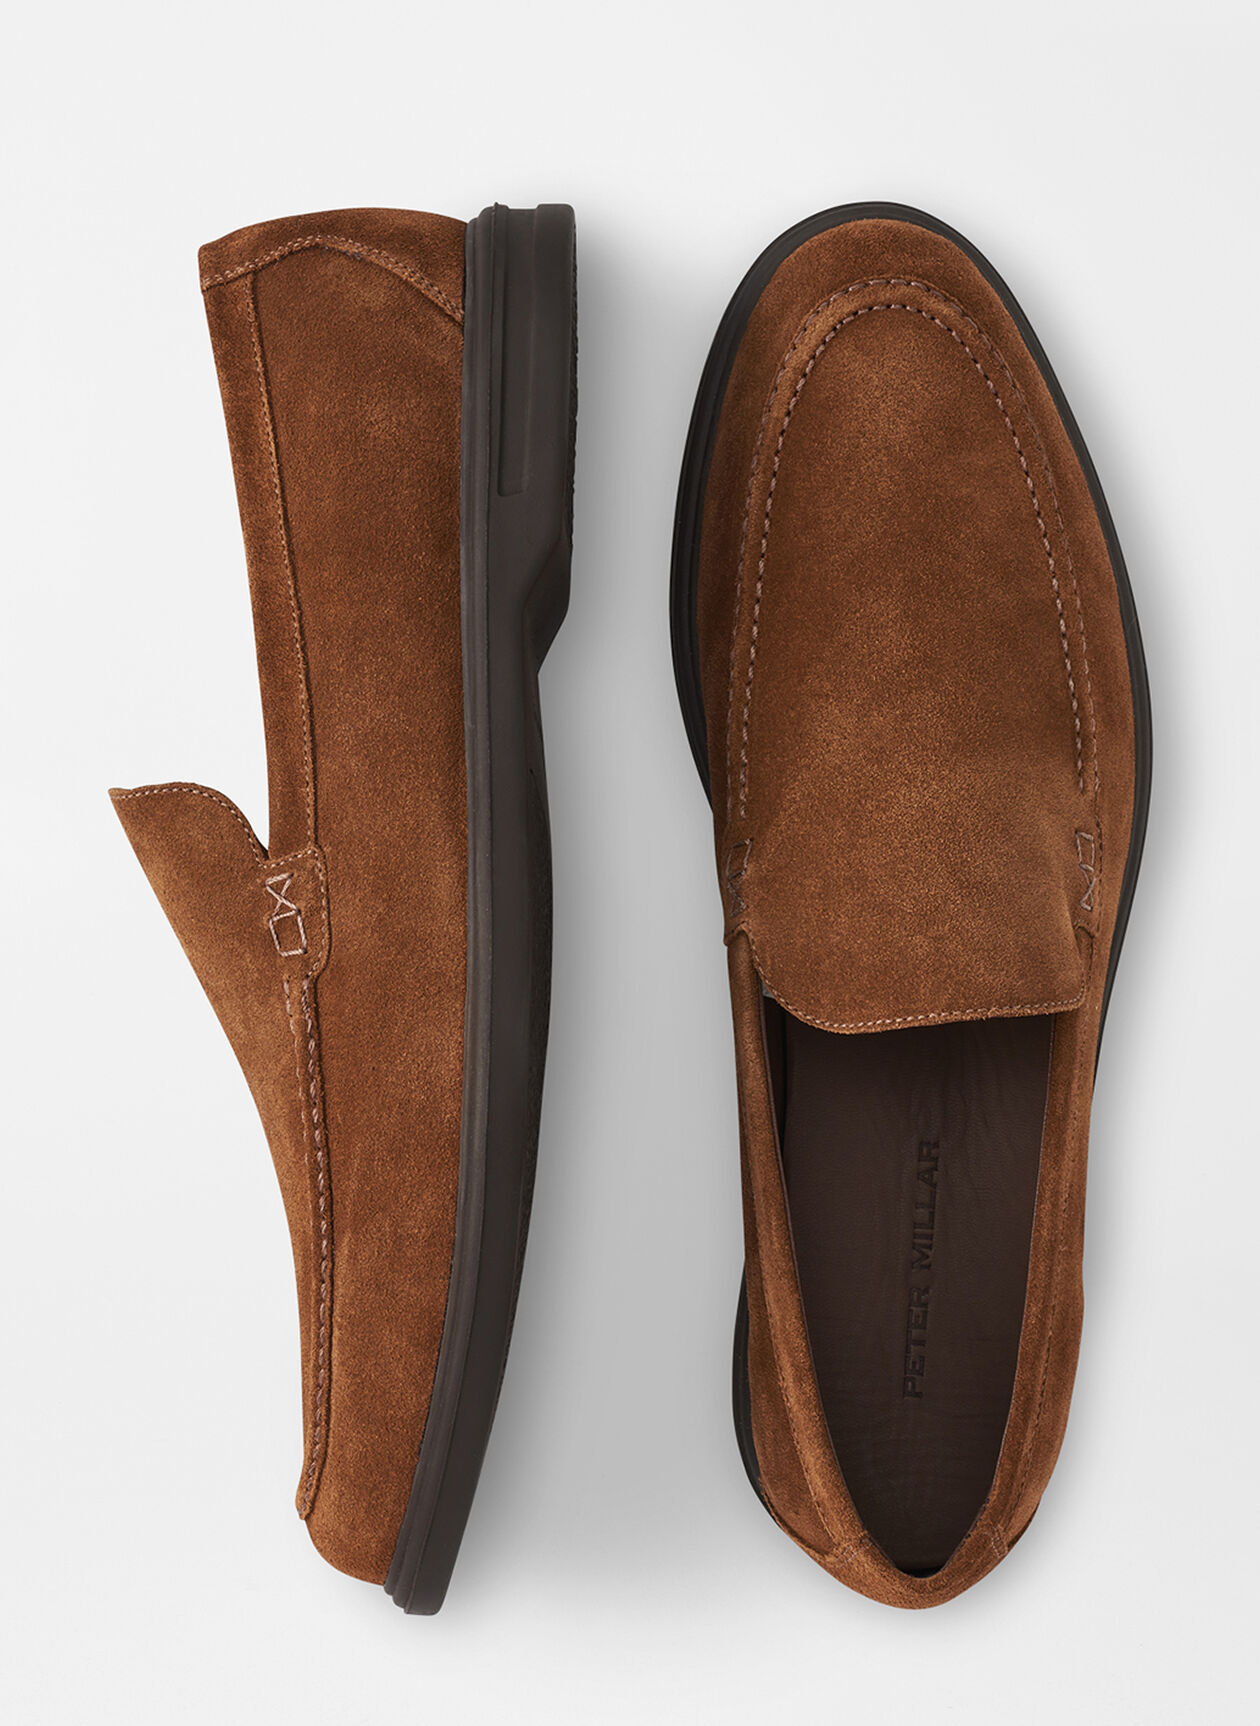 Best Loafers for Men: 12 Options to Update Your Wardrobe | TIME Stamped